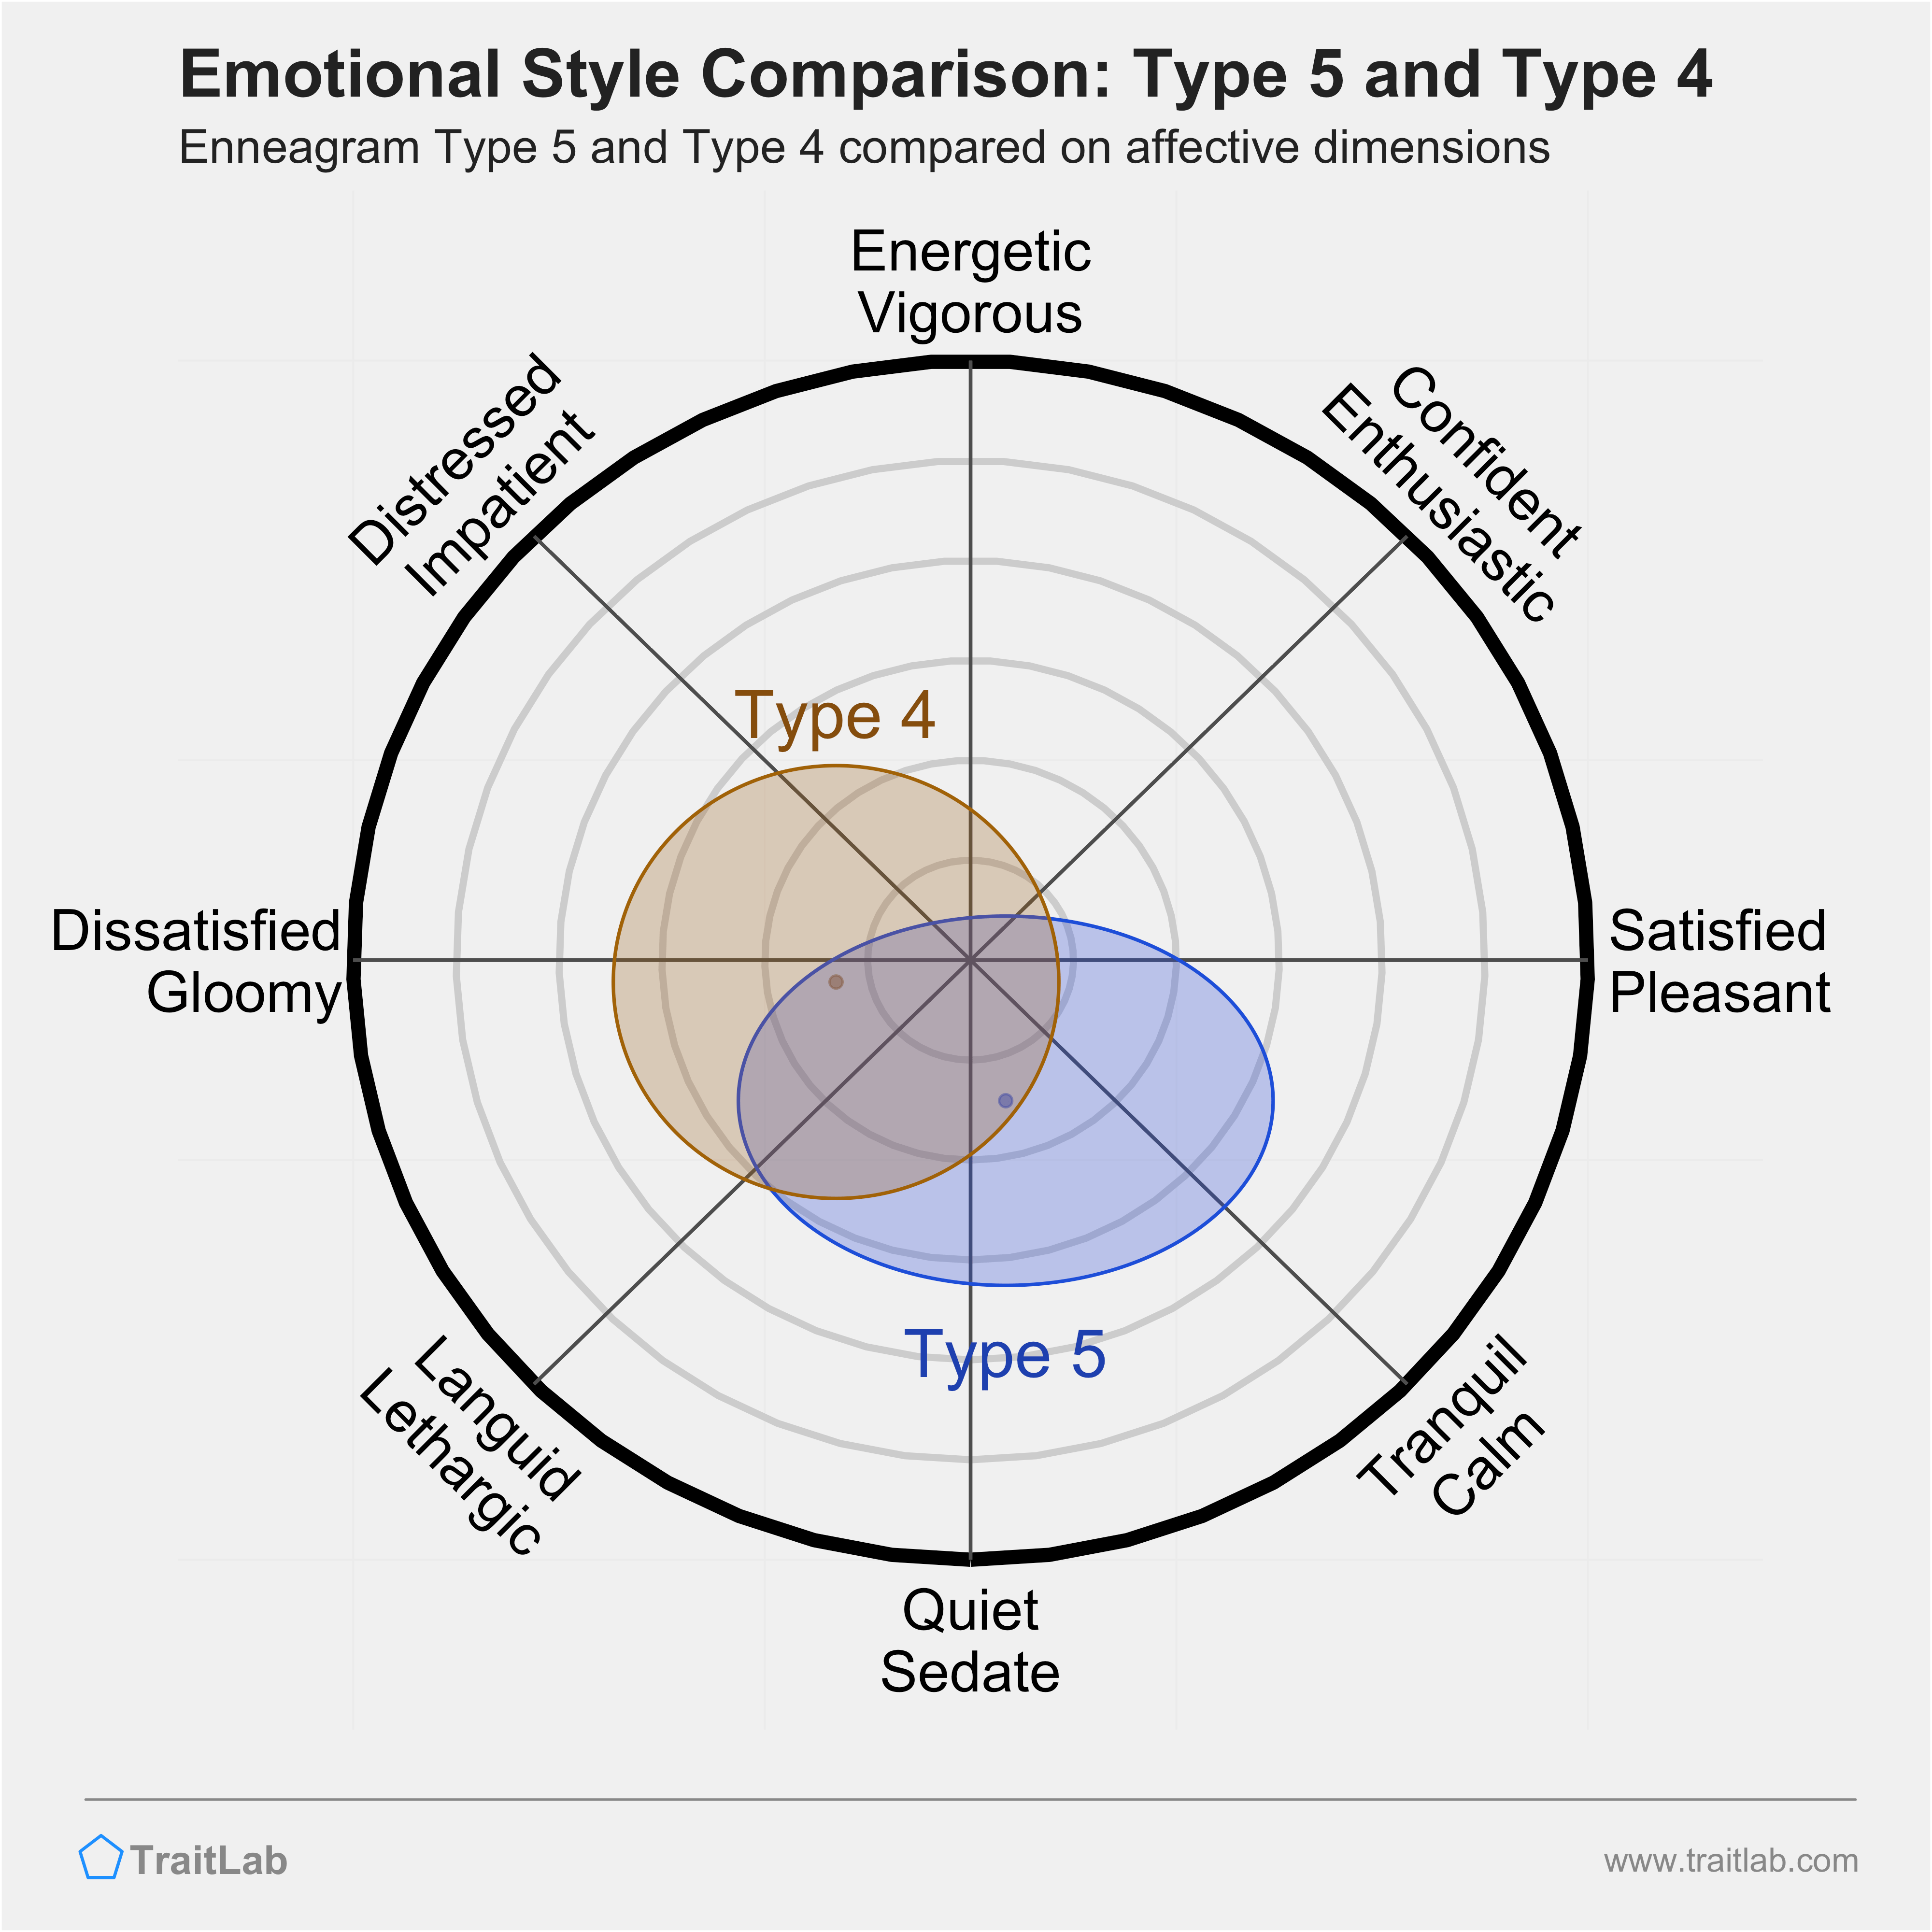 Type 5 and Type 4 comparison across emotional (affective) dimensions